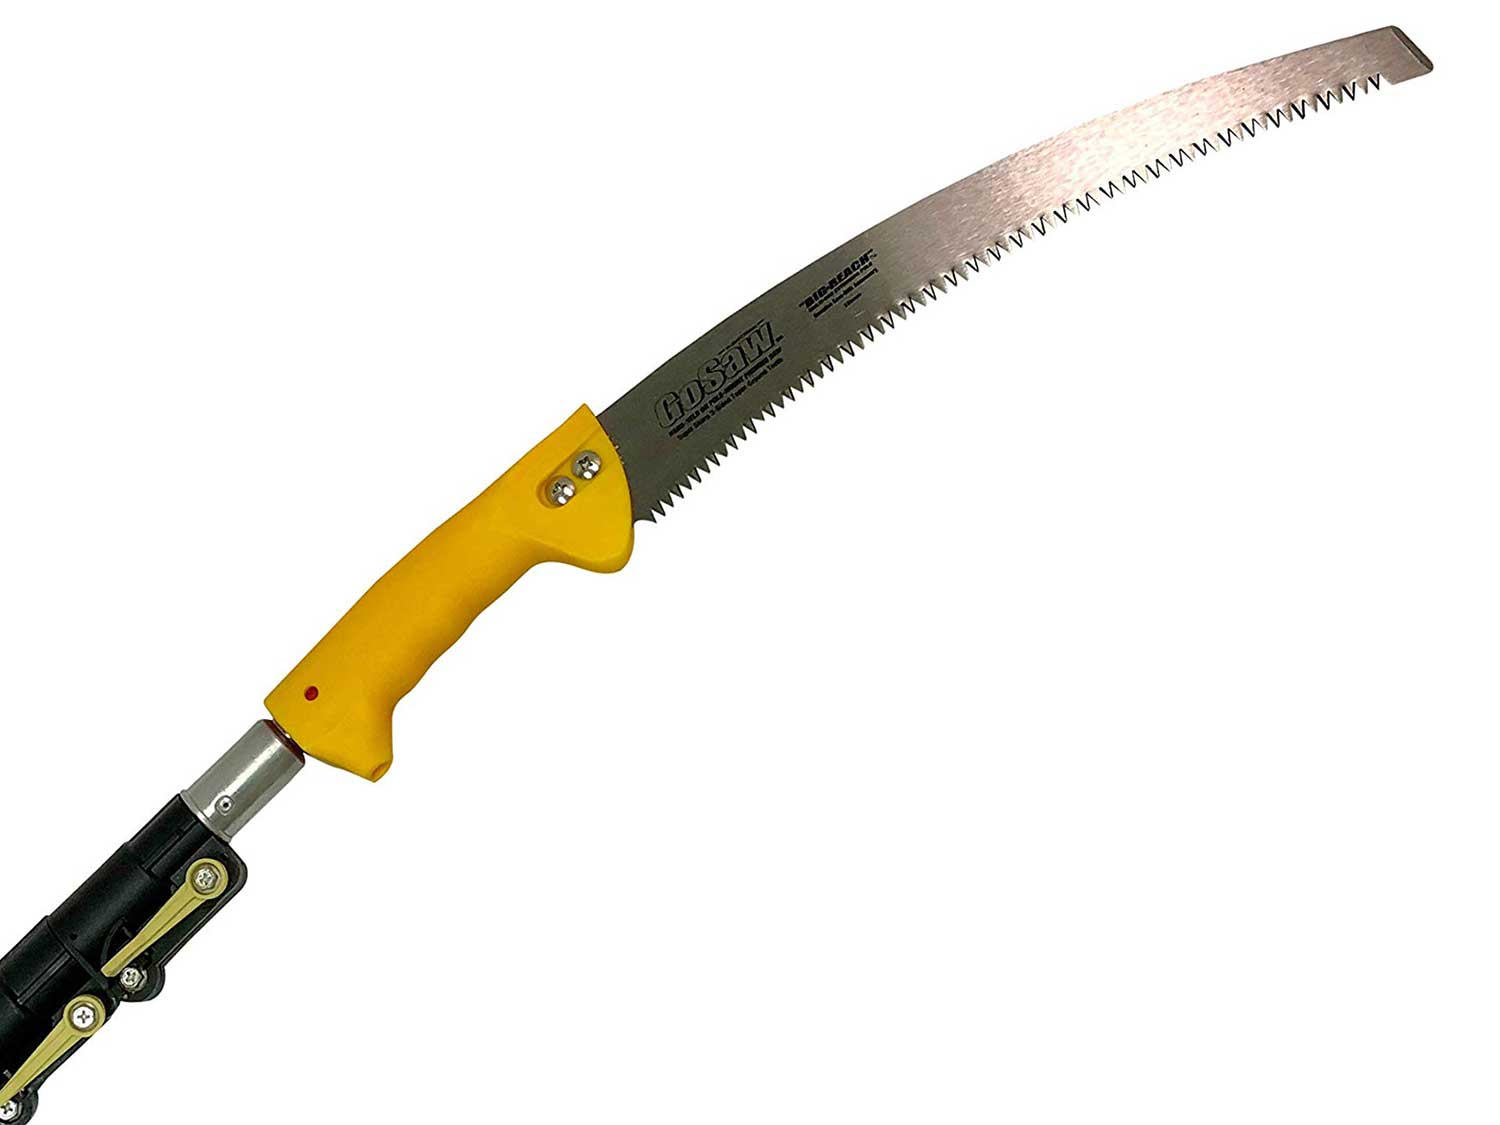 DocaPole 5-12 Foot Pole Pruning Saw